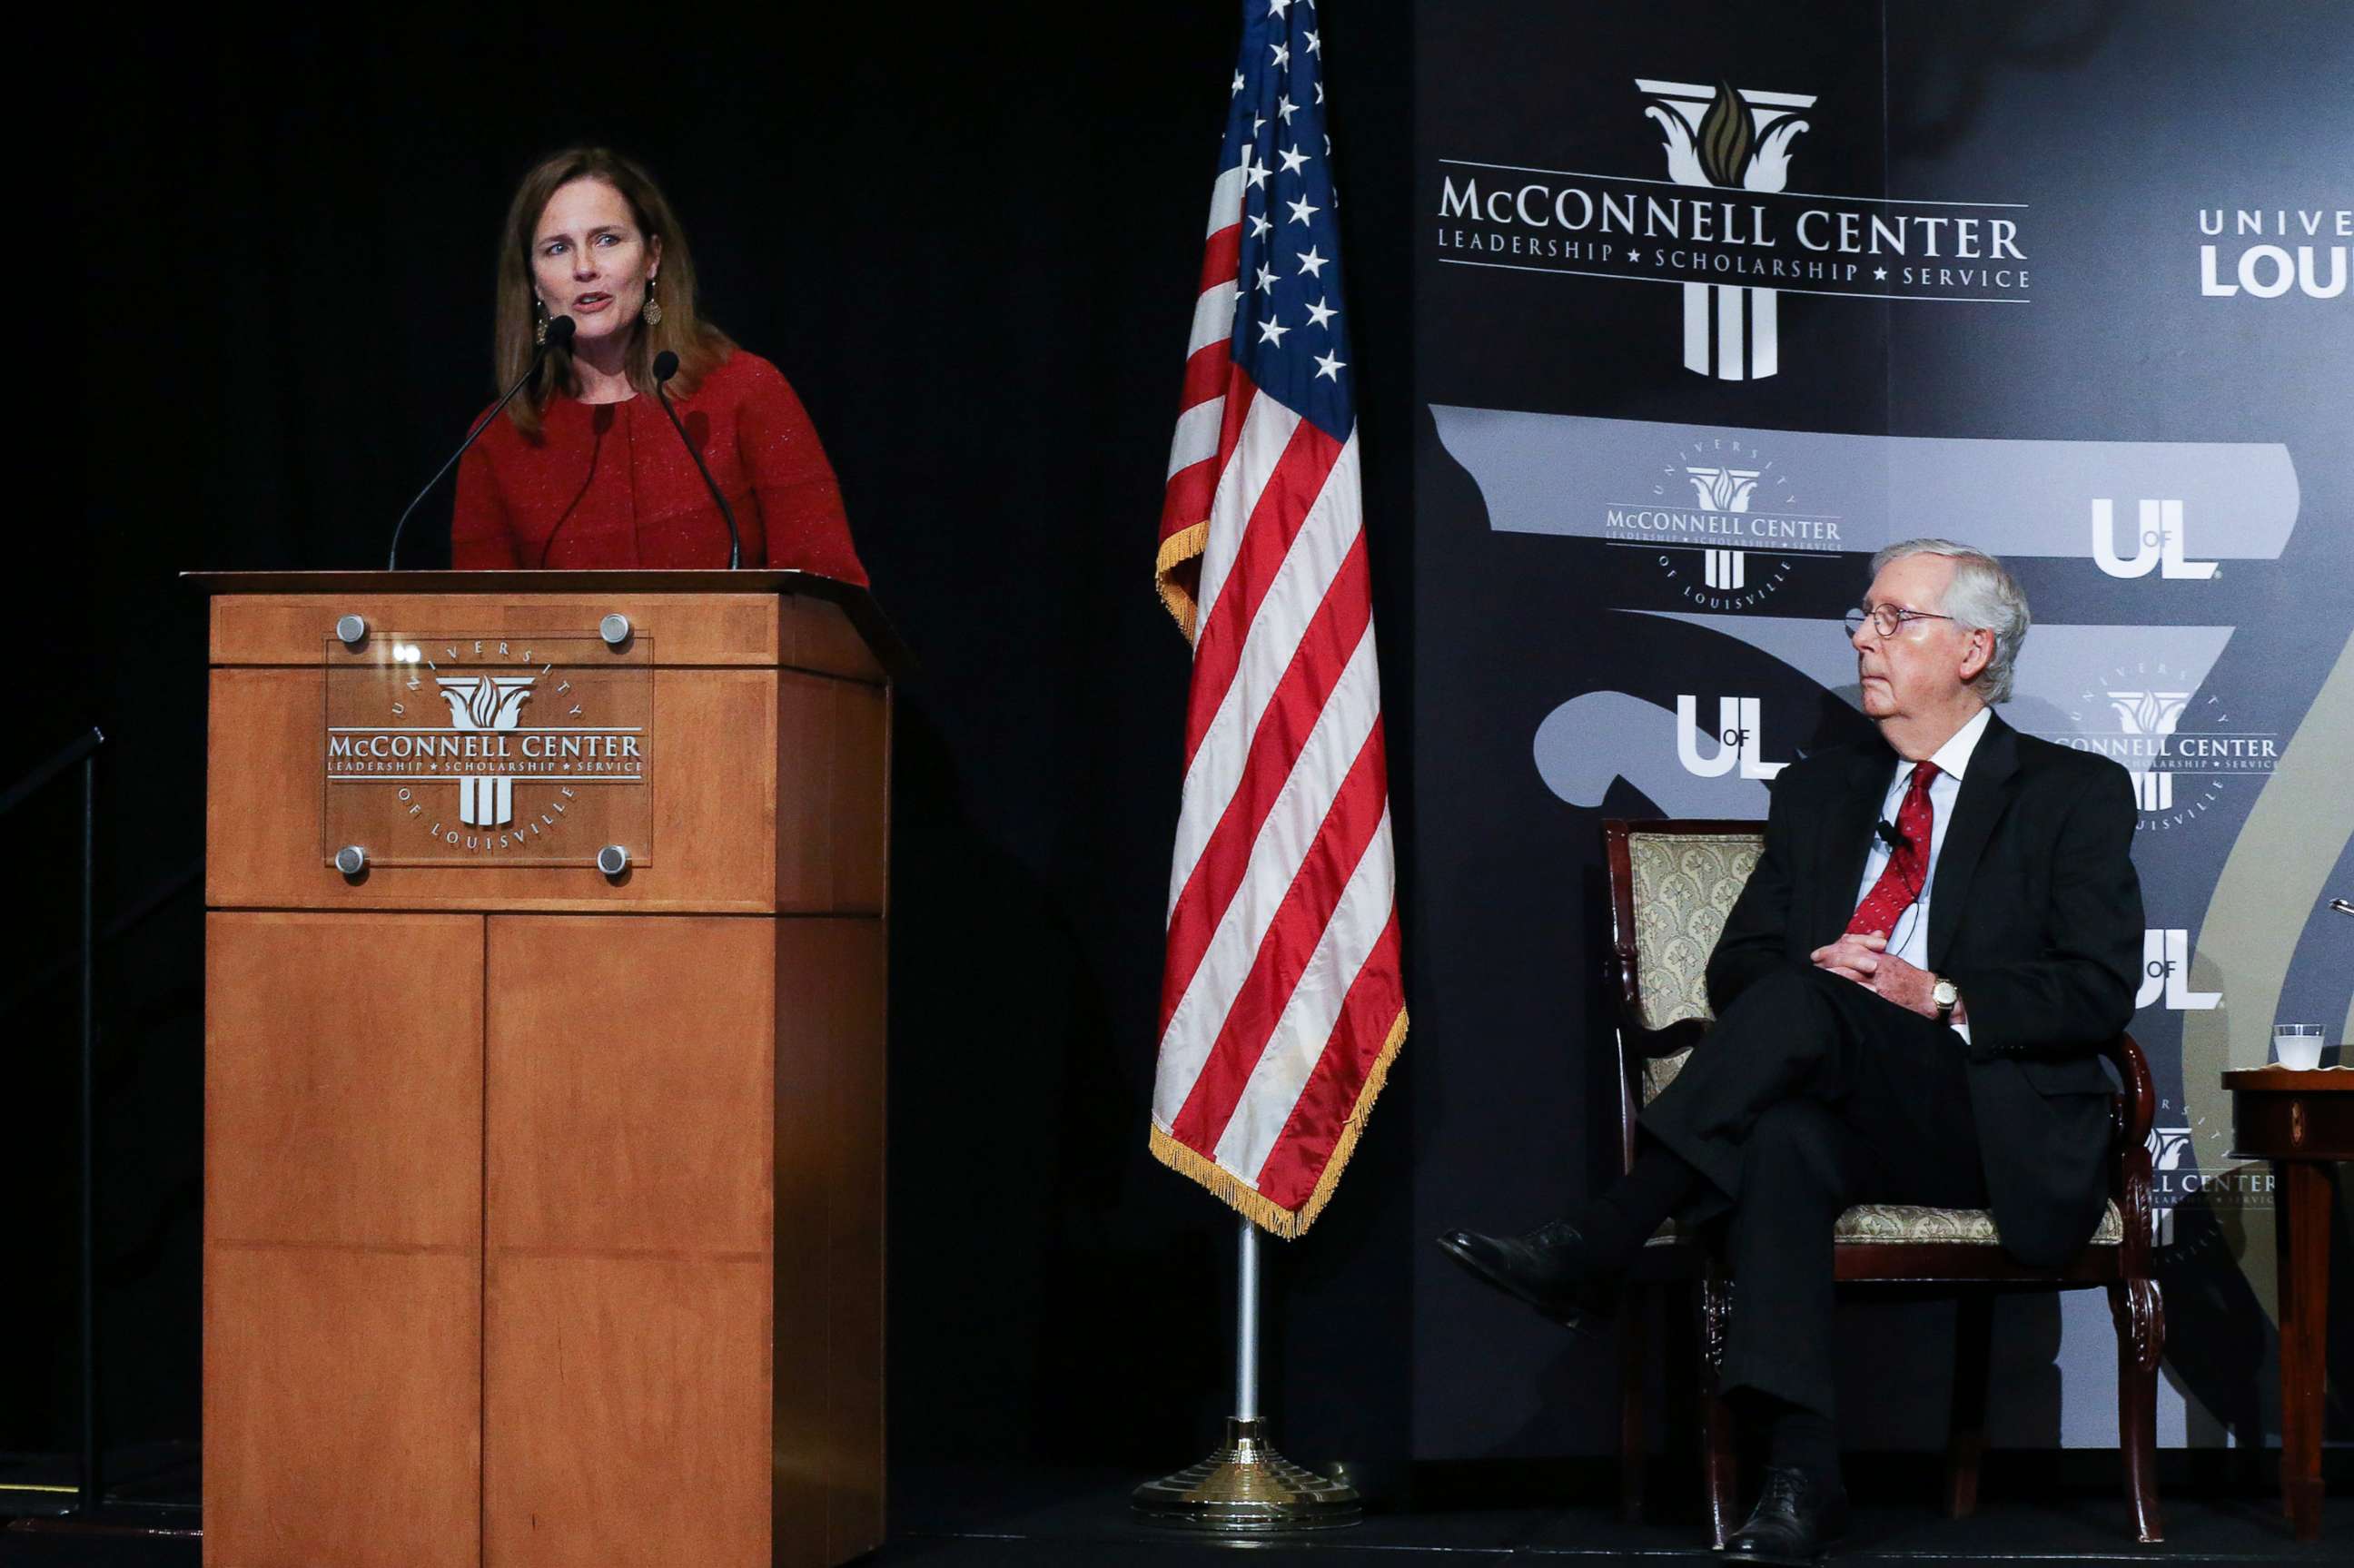 PHOTO: U.S. Supreme Court Associate Justice Amy Coney Barrett made remarks during a lecture at the McConnell Center held at the Seelbach Hotel in Louisville, Ky. on Sep. 12, 2021.